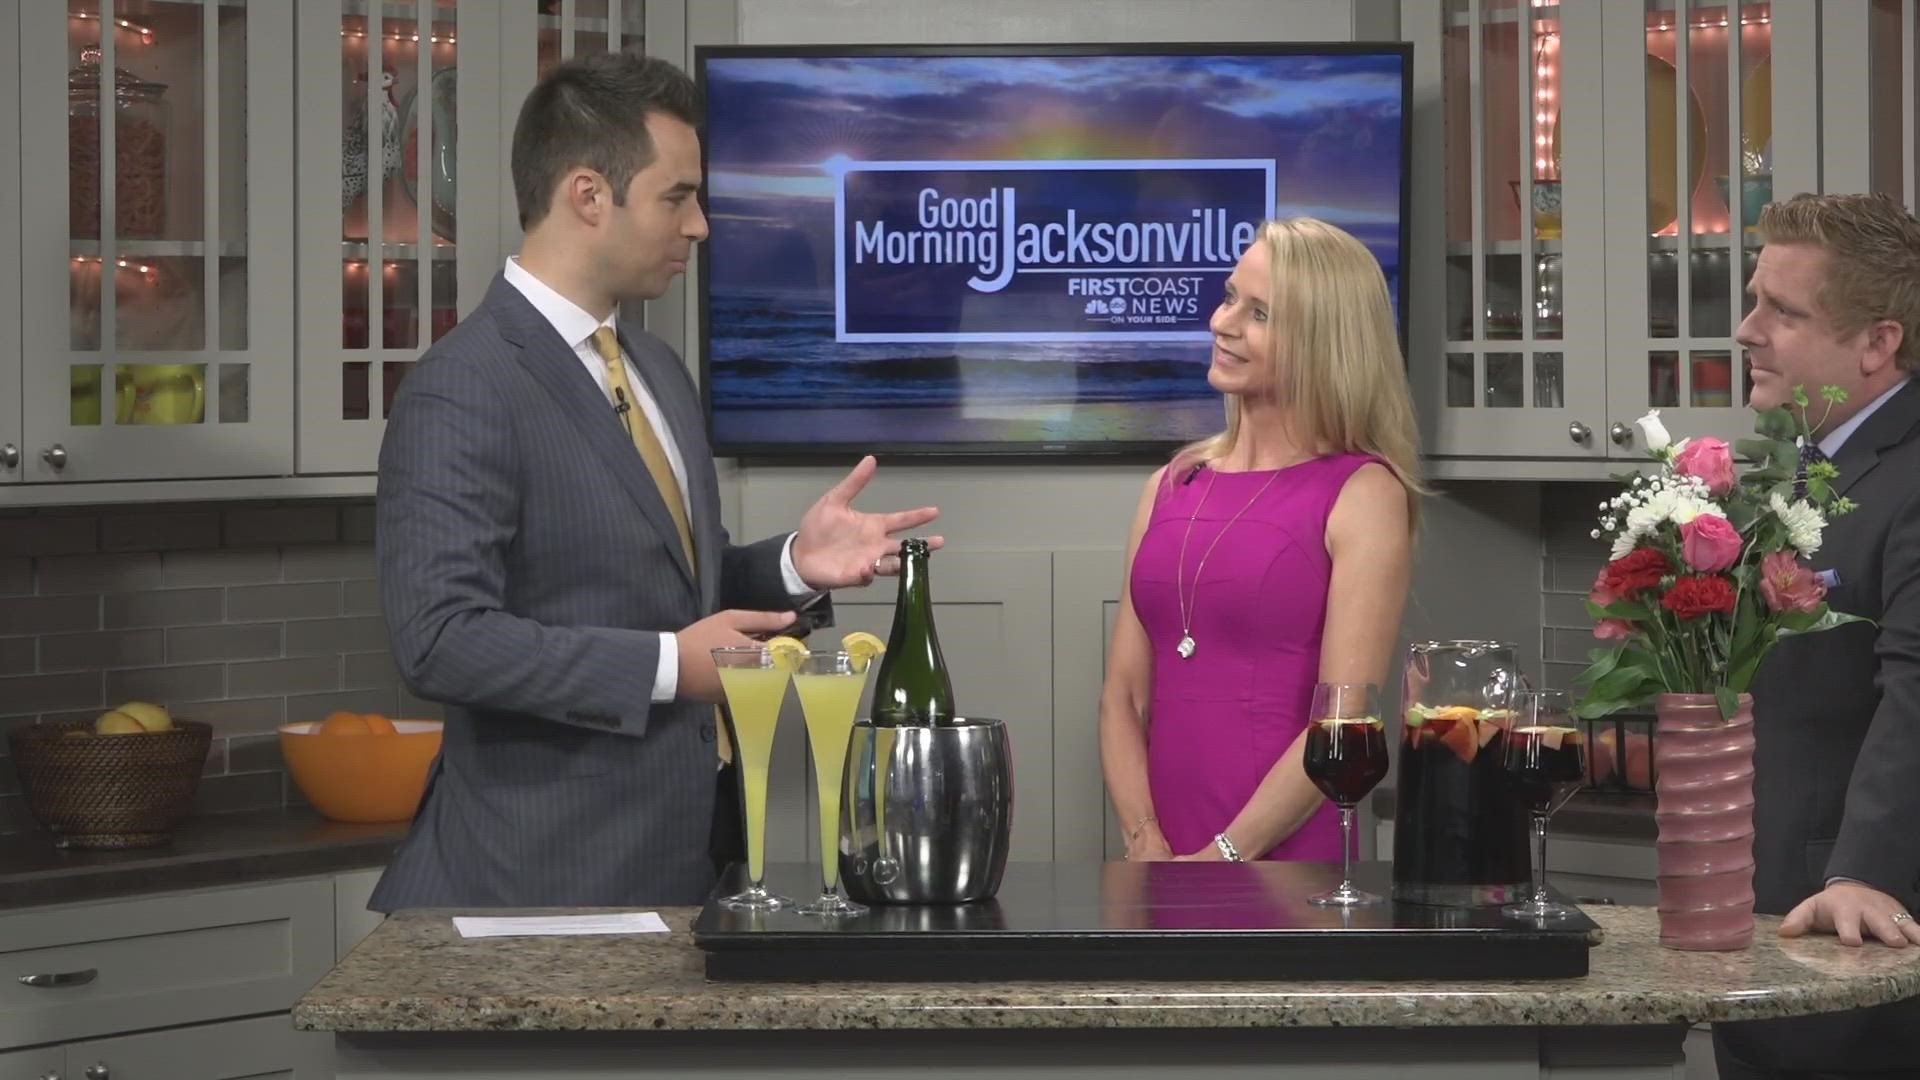 Dr. Kathryn Pearson of Precision Imaging Centers joined the GMJ crew to talk about their program Women’s Weekend Every Weekend.